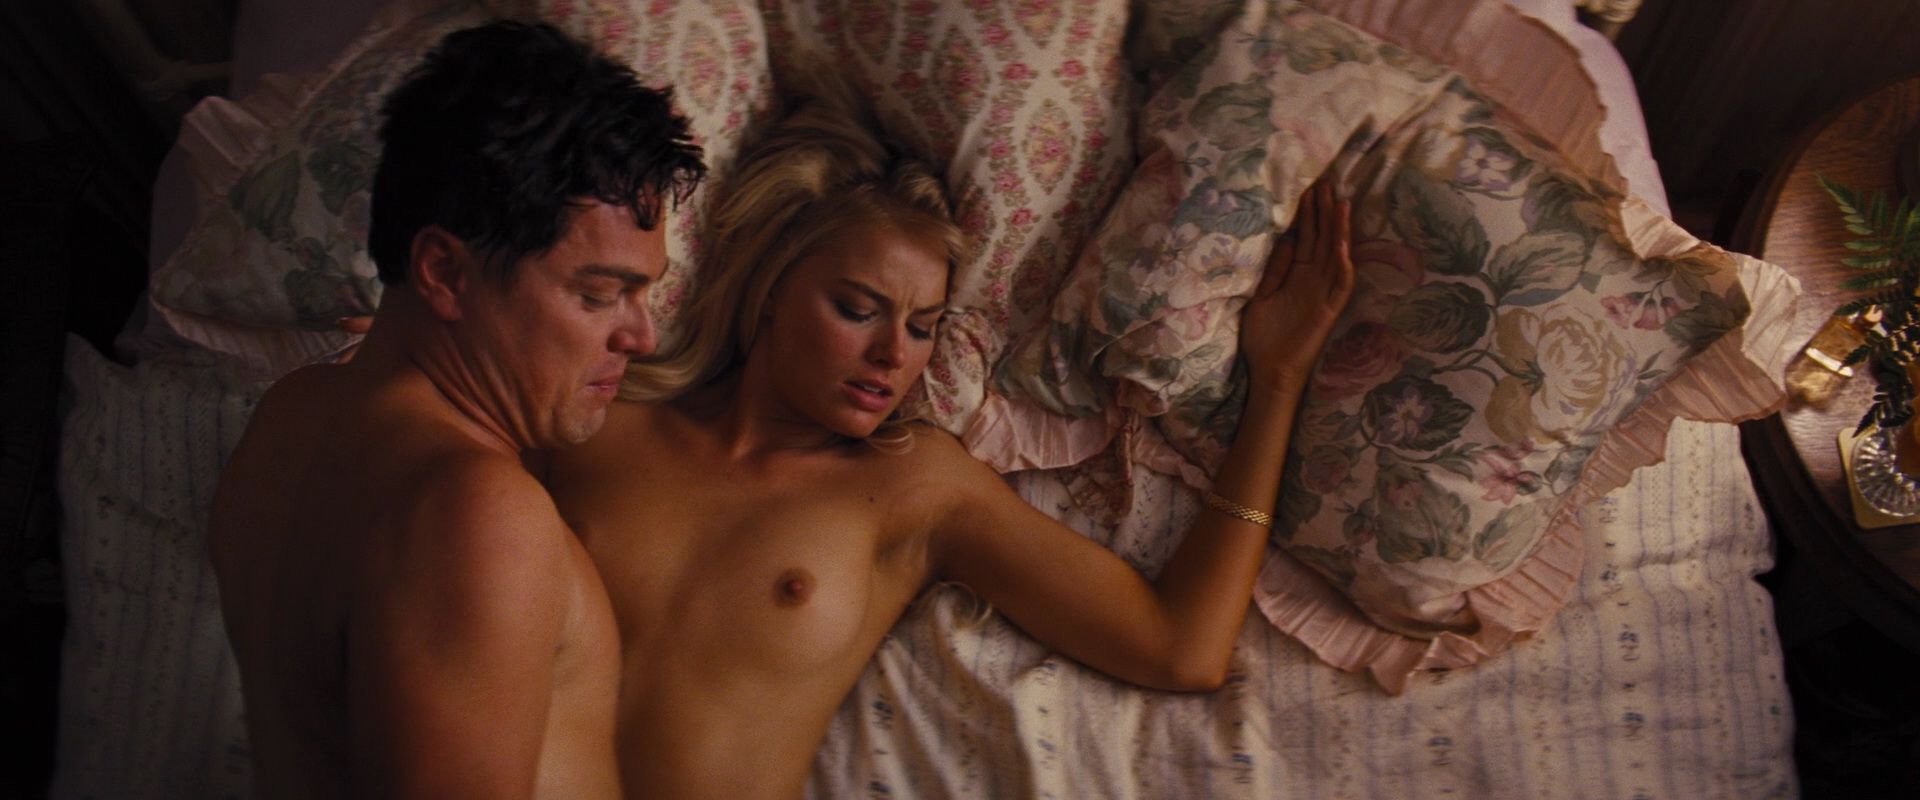 Wolf of wall street sexy scenes